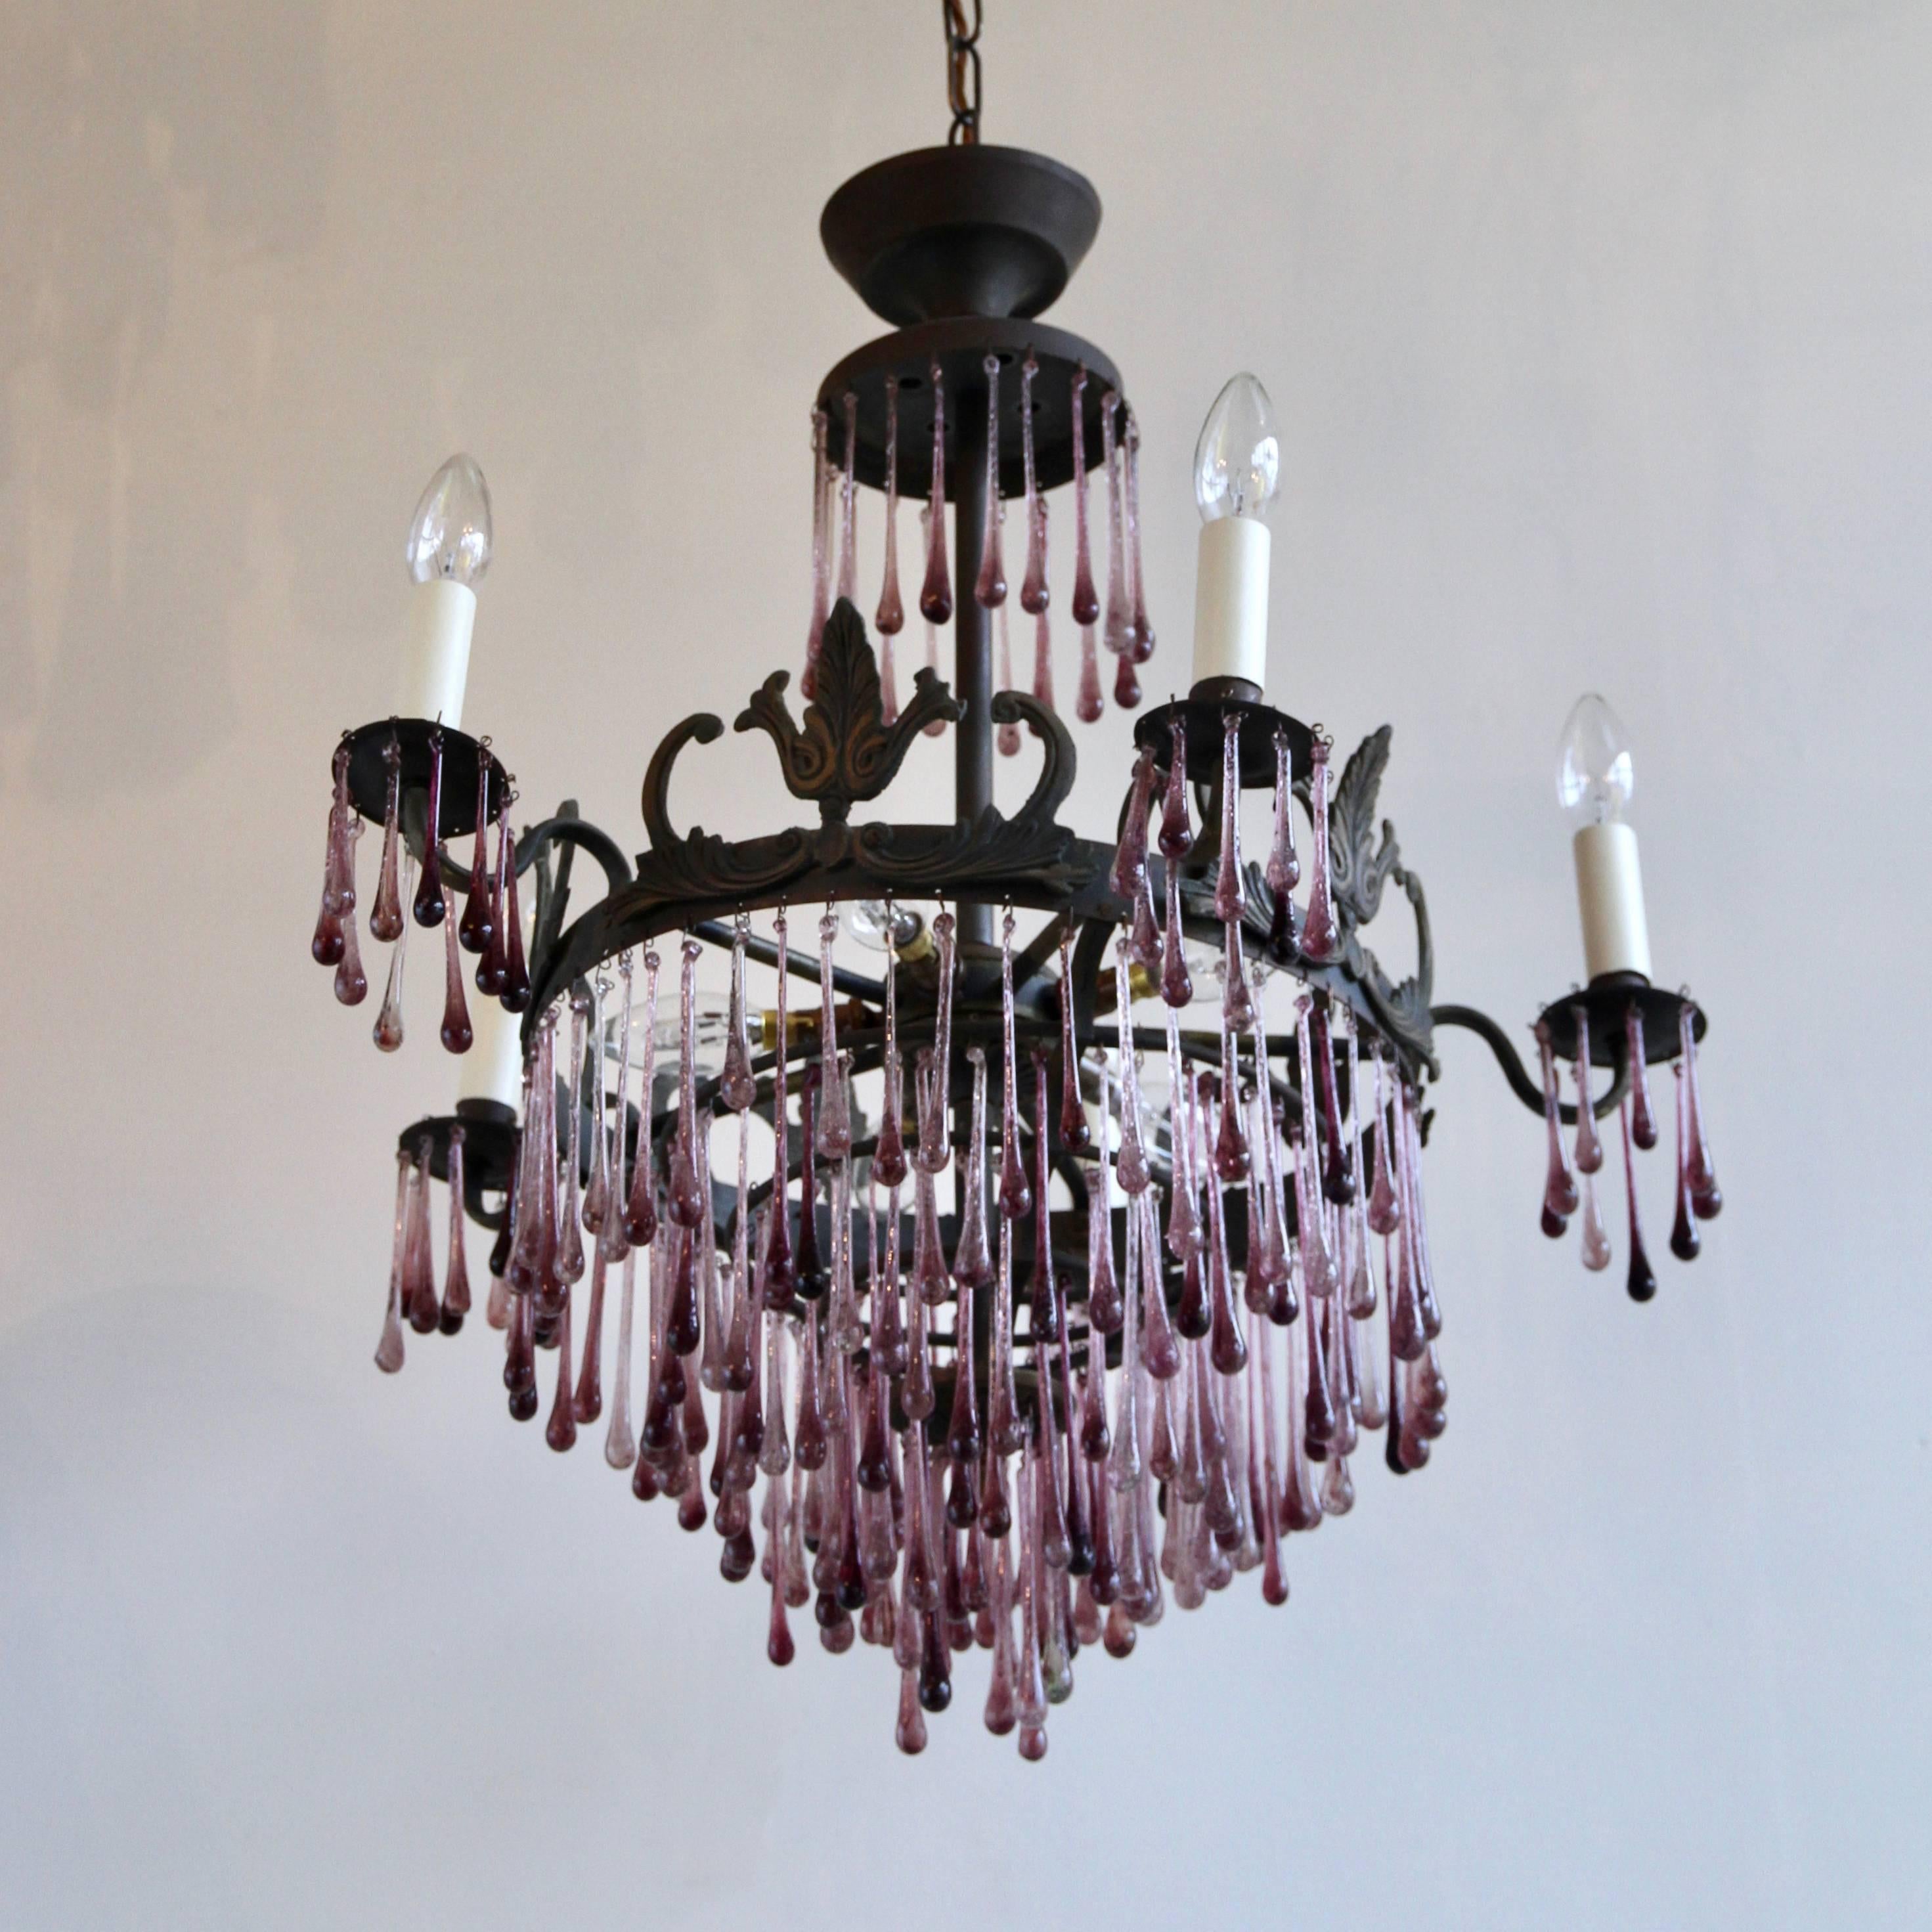 1920s French ornate waterfall chandelier frame dressed in striking contemporary amethyst glass teardrops. This light would provide a bold injection of color as it is still impactful even when unlit. It has a total of ten lamps, fiver SBC inner and